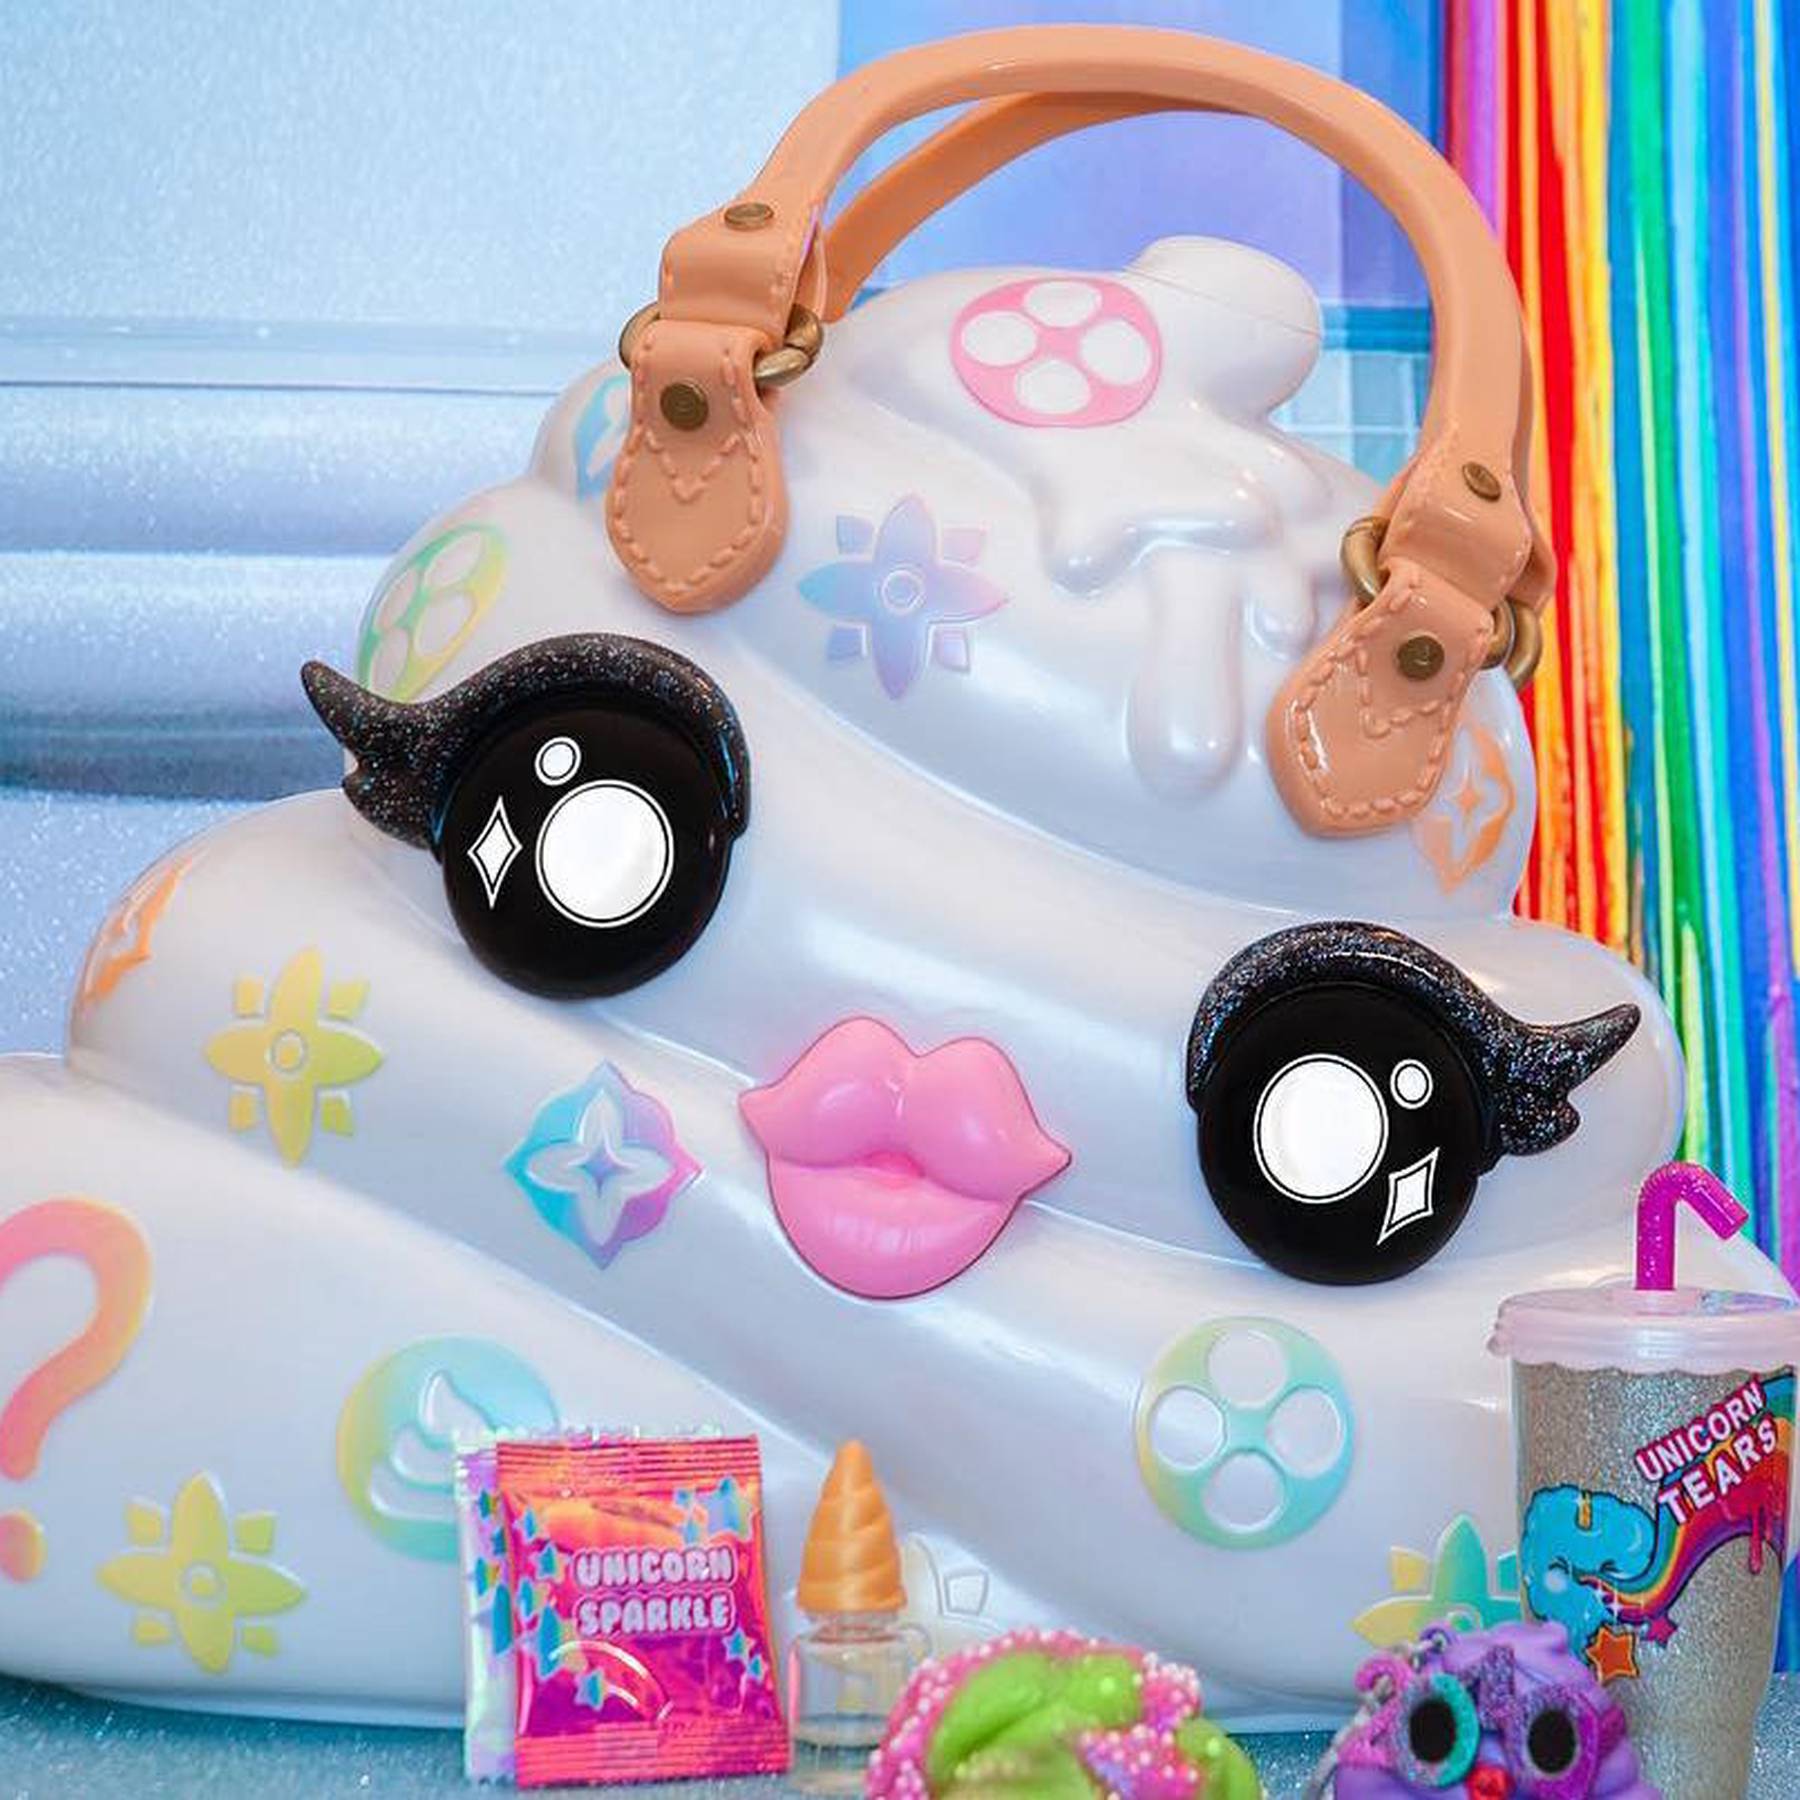 Pooey Puitton' Toy Purse Maker Sues LVMH